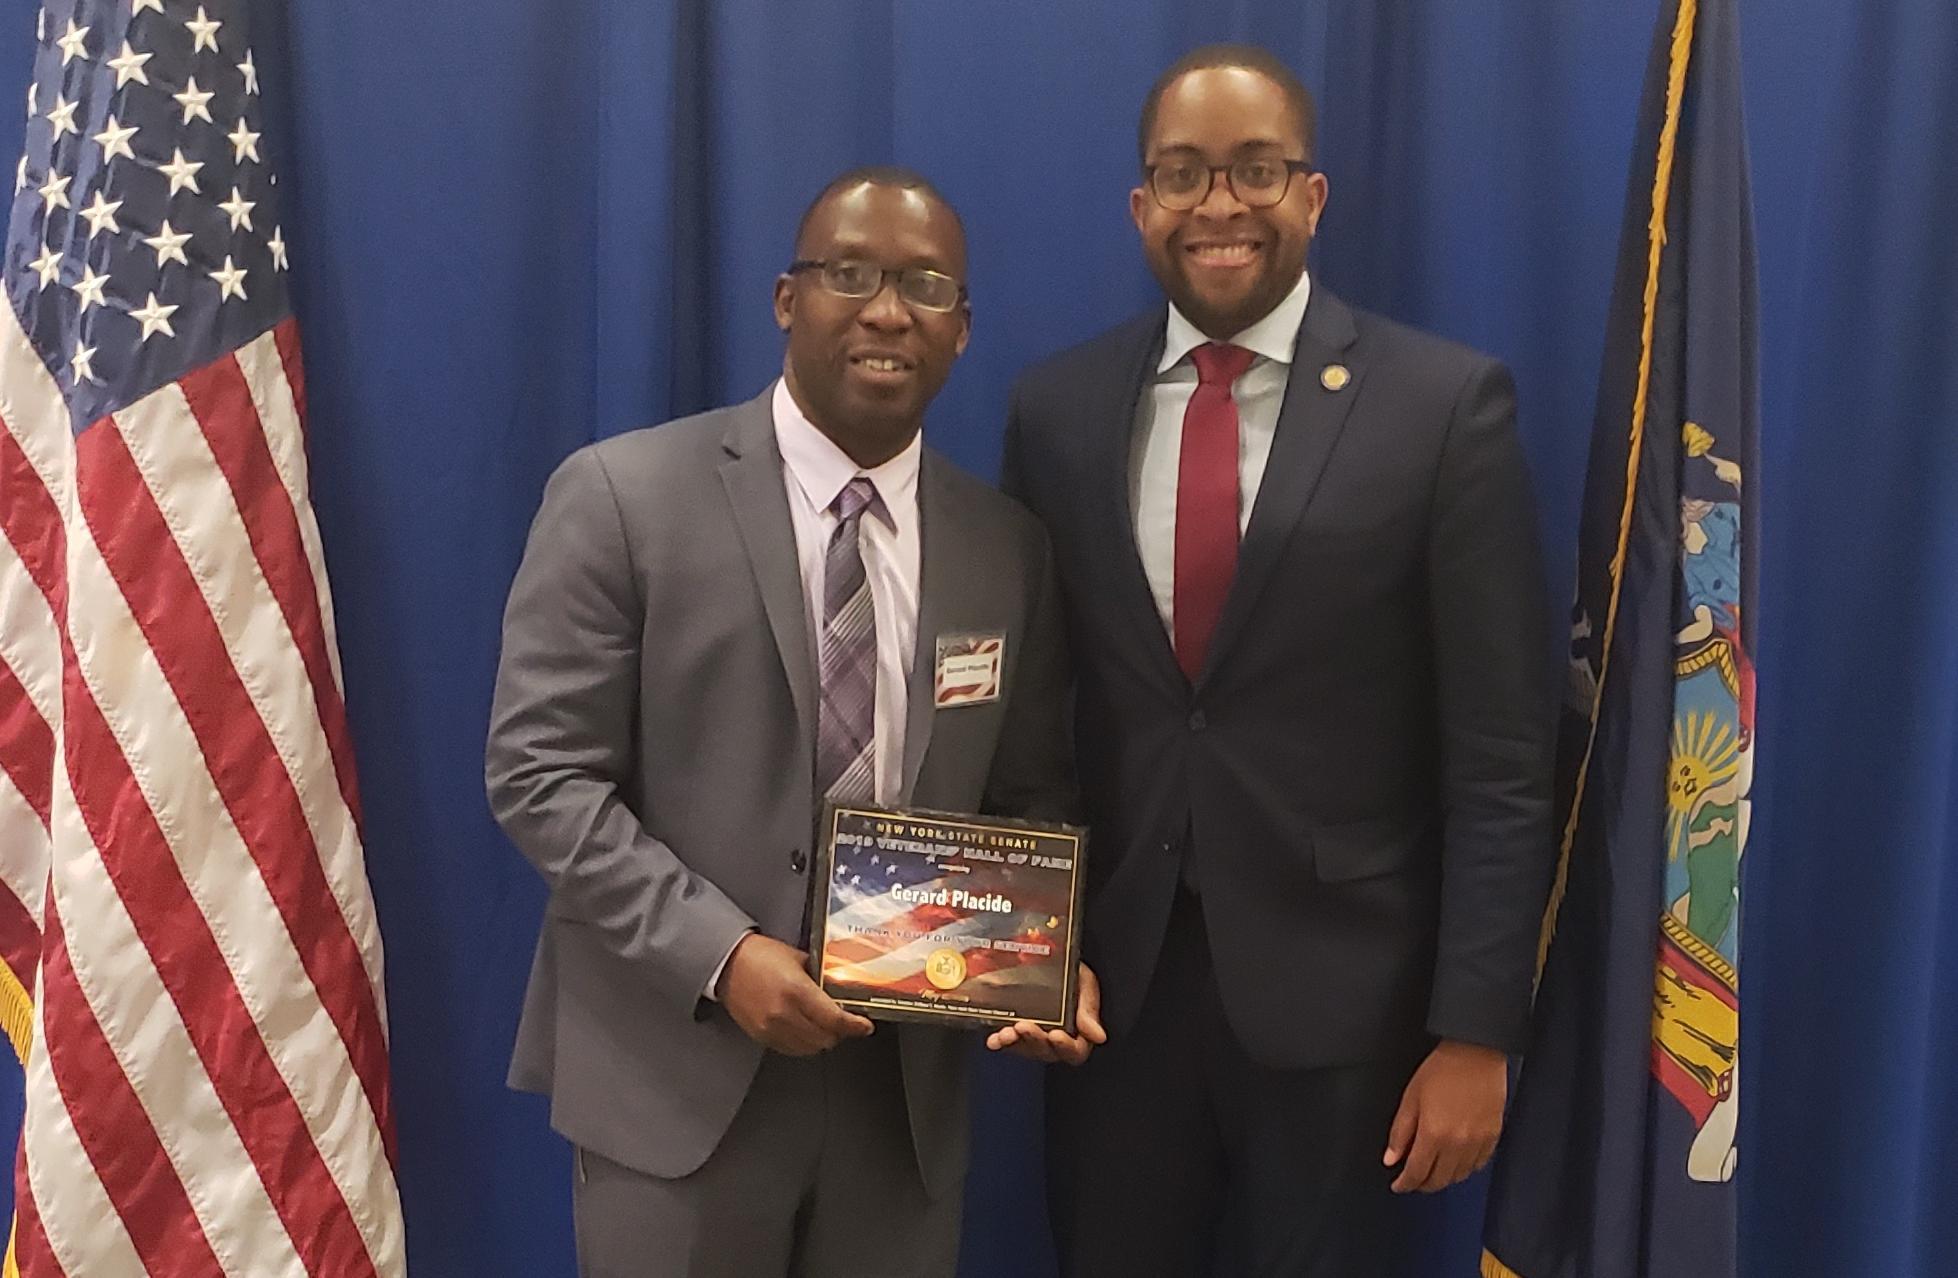 Gerard Placide with Senator Zellnor Myrie at the New York State Senate.